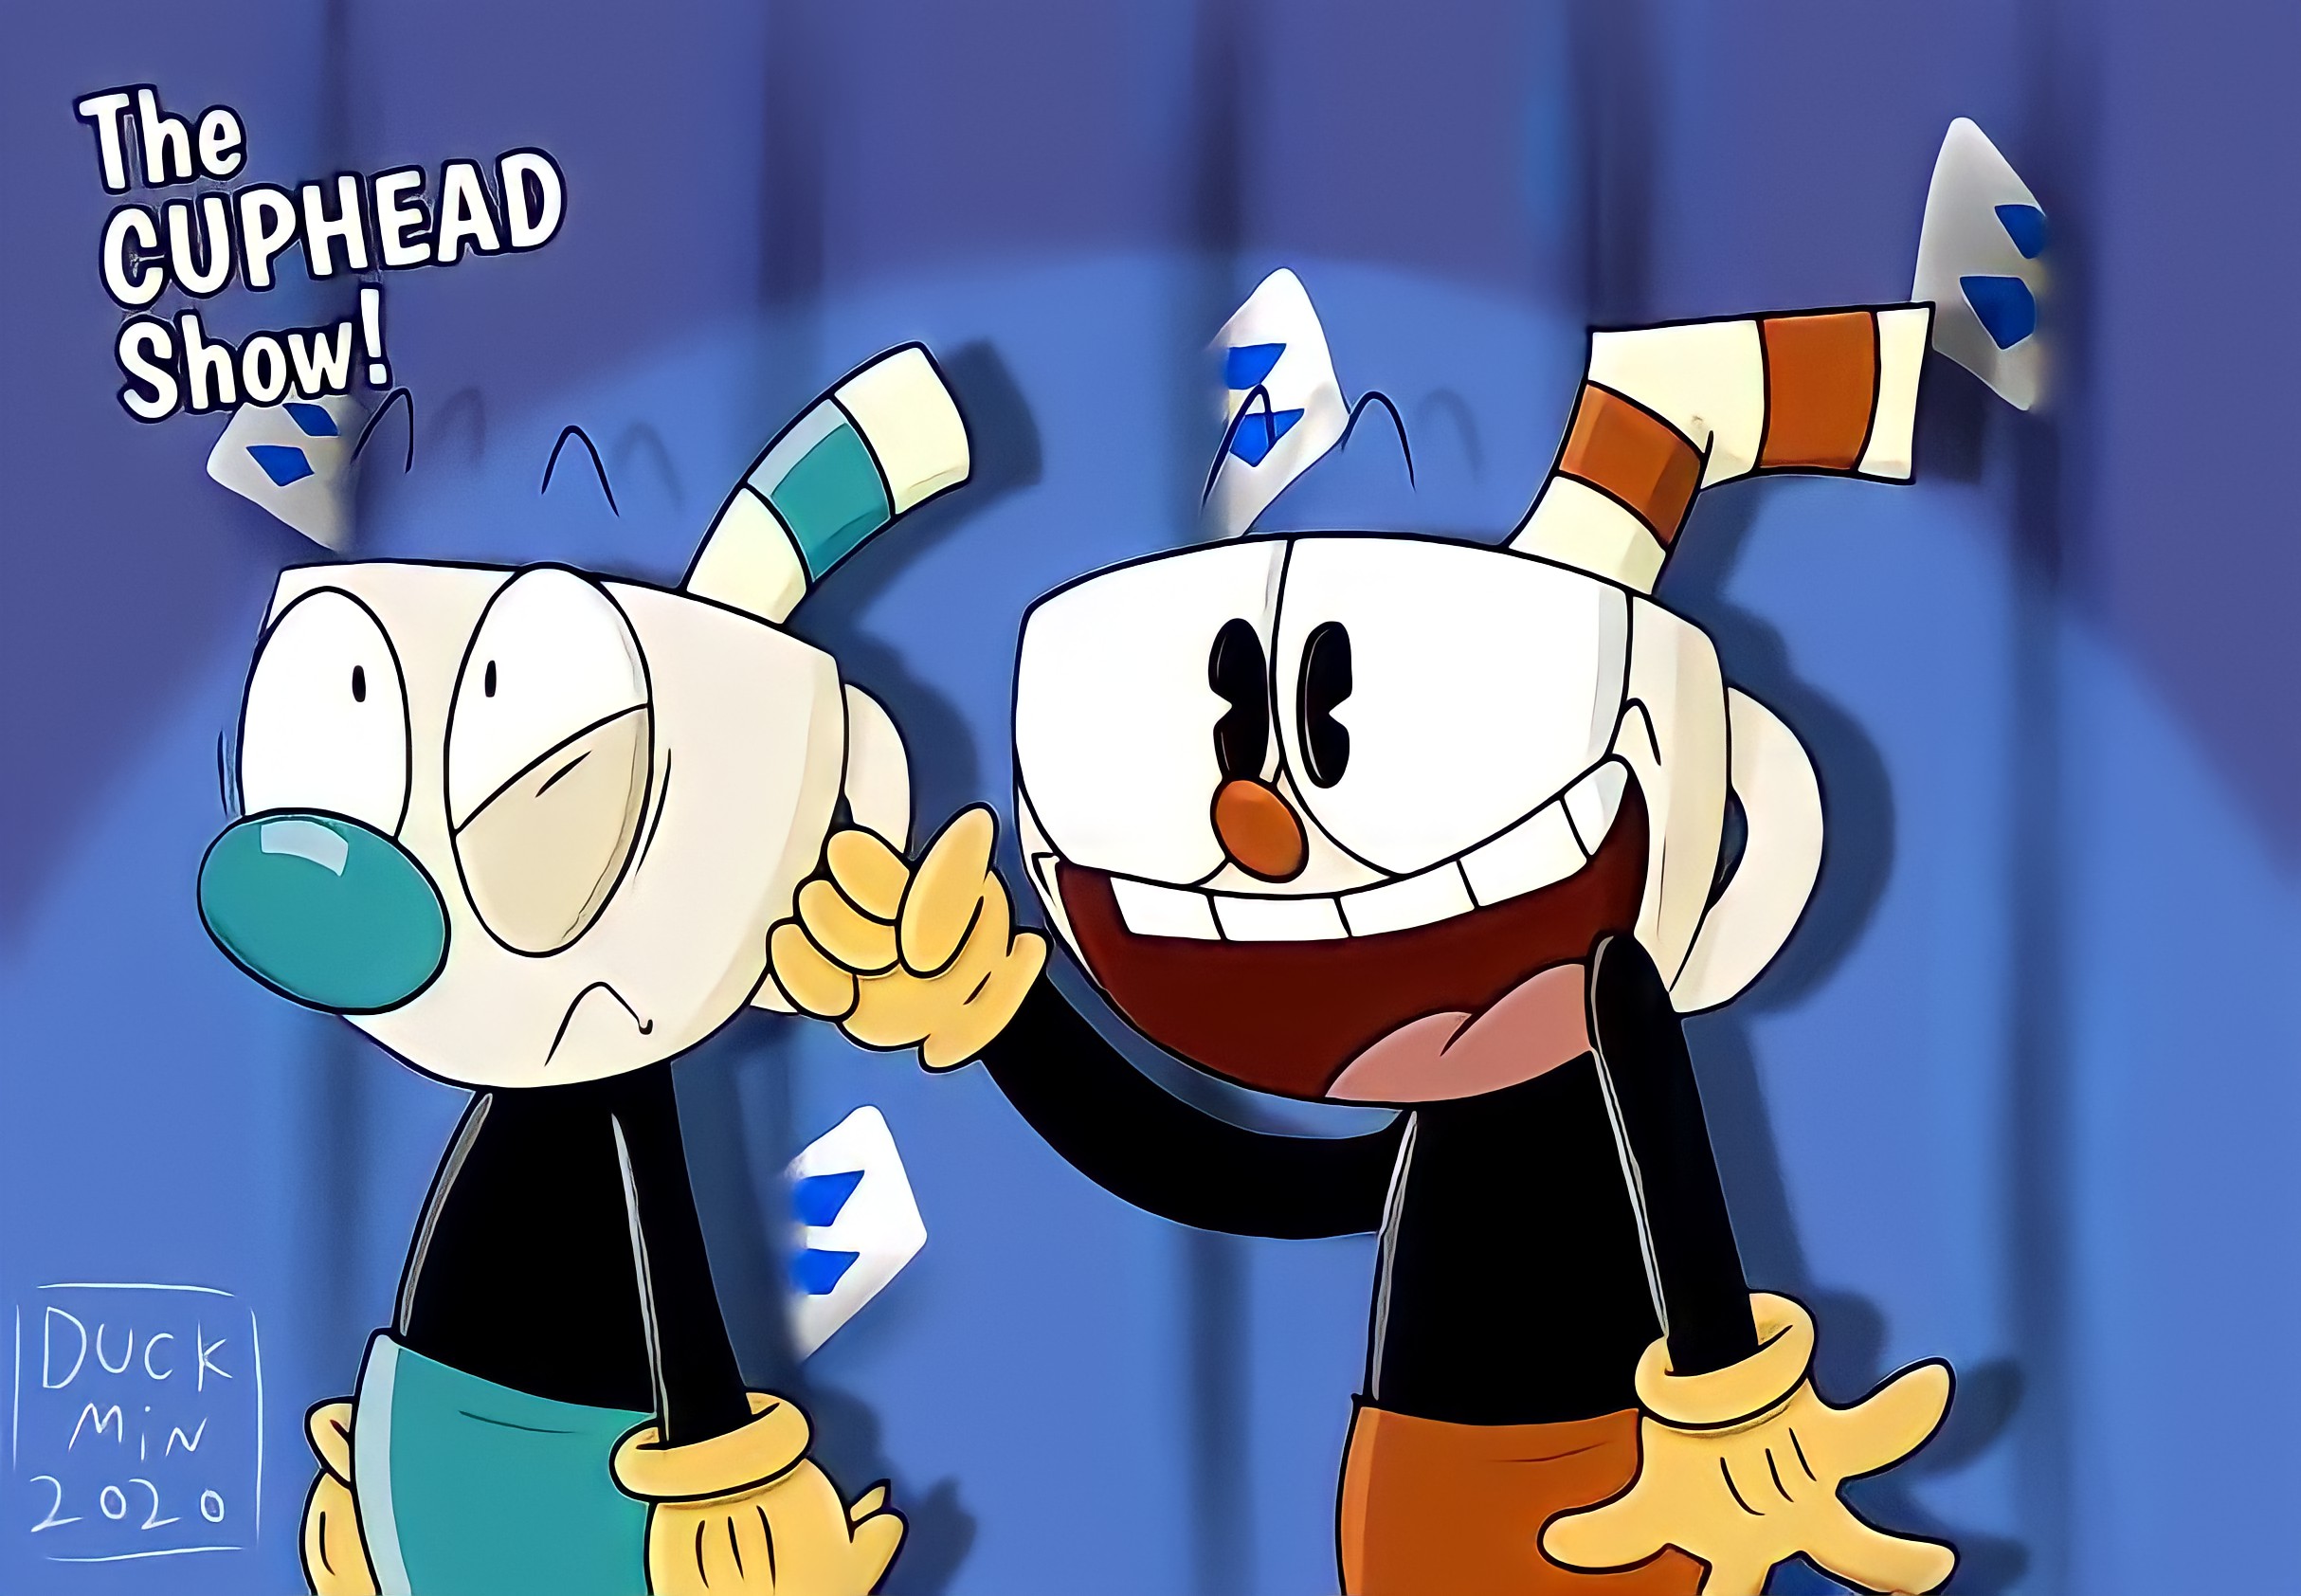 My Favourite Characters of The CupHead Show 2022 by GMDay on DeviantArt